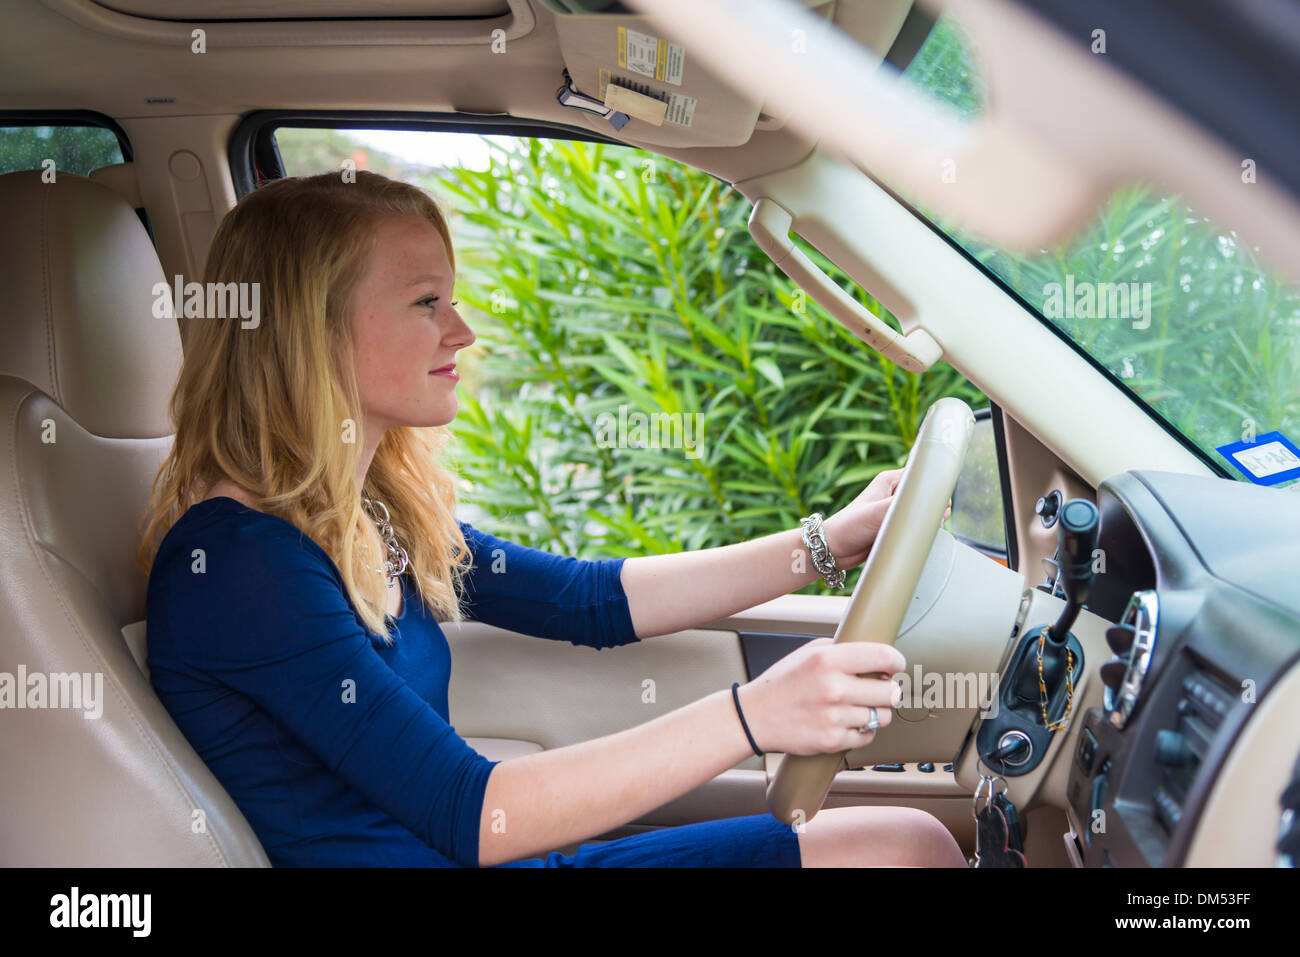 16 years old girl sitting in a large SUV car and is about to drive. She has received her drivers license just weeks ago. Stock Photo